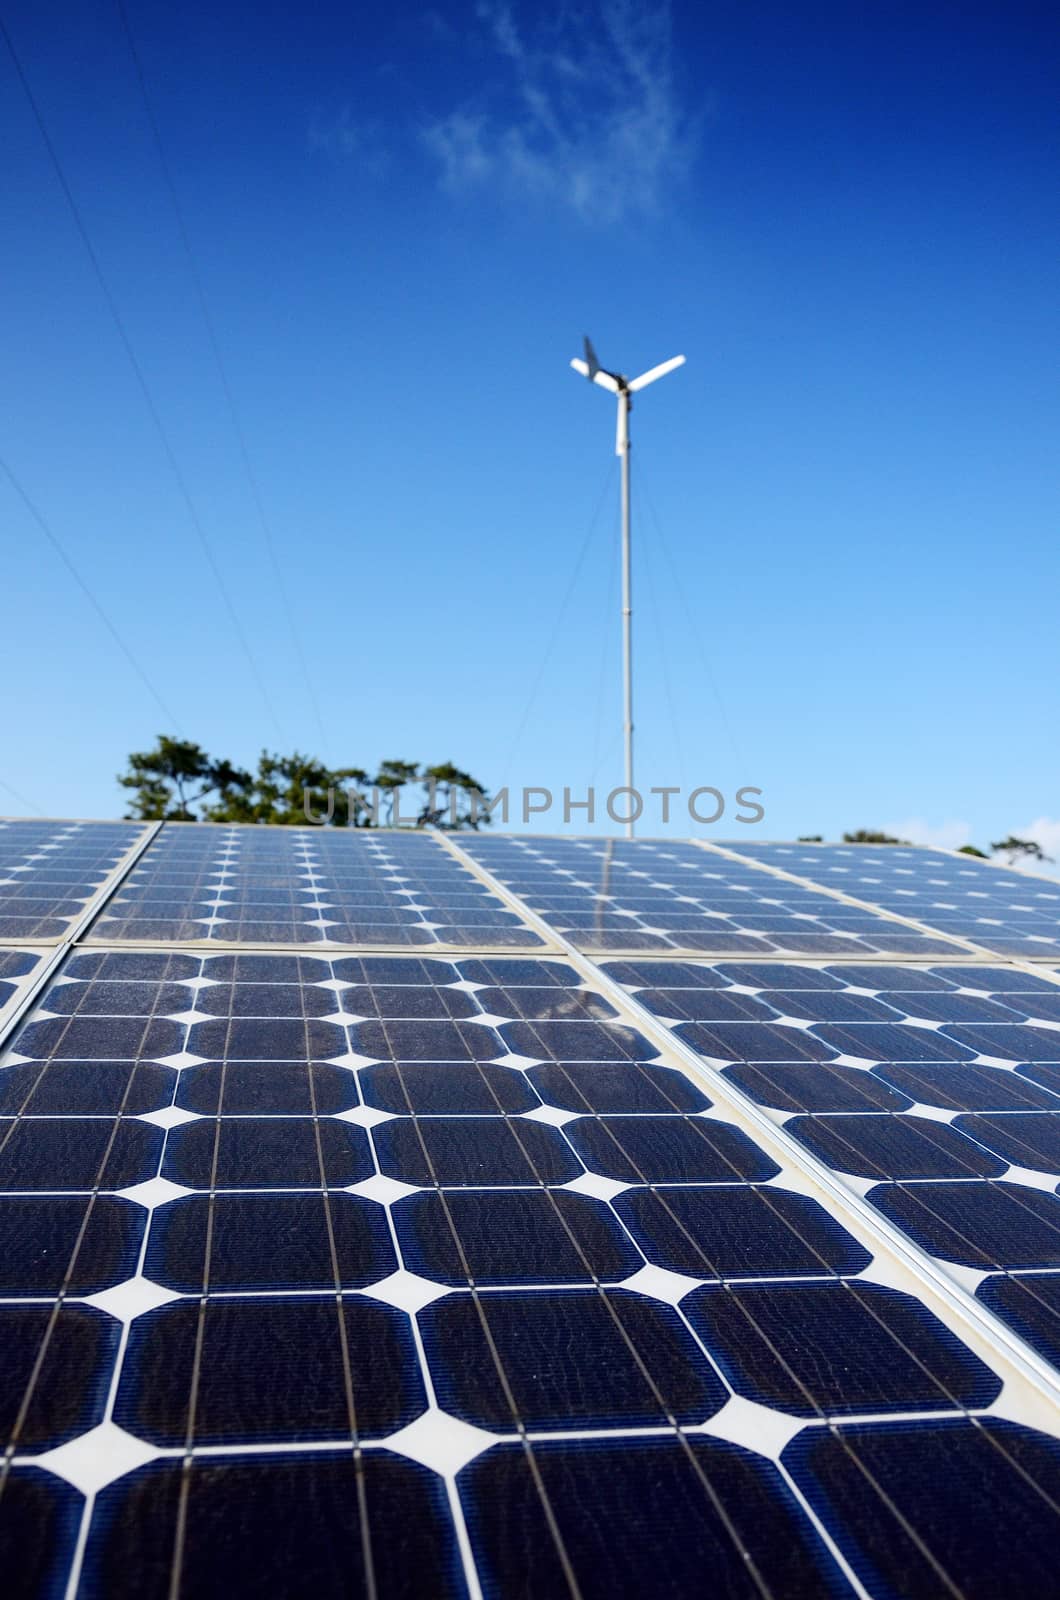 Solar cell panel in solar farm close up by pixbox77